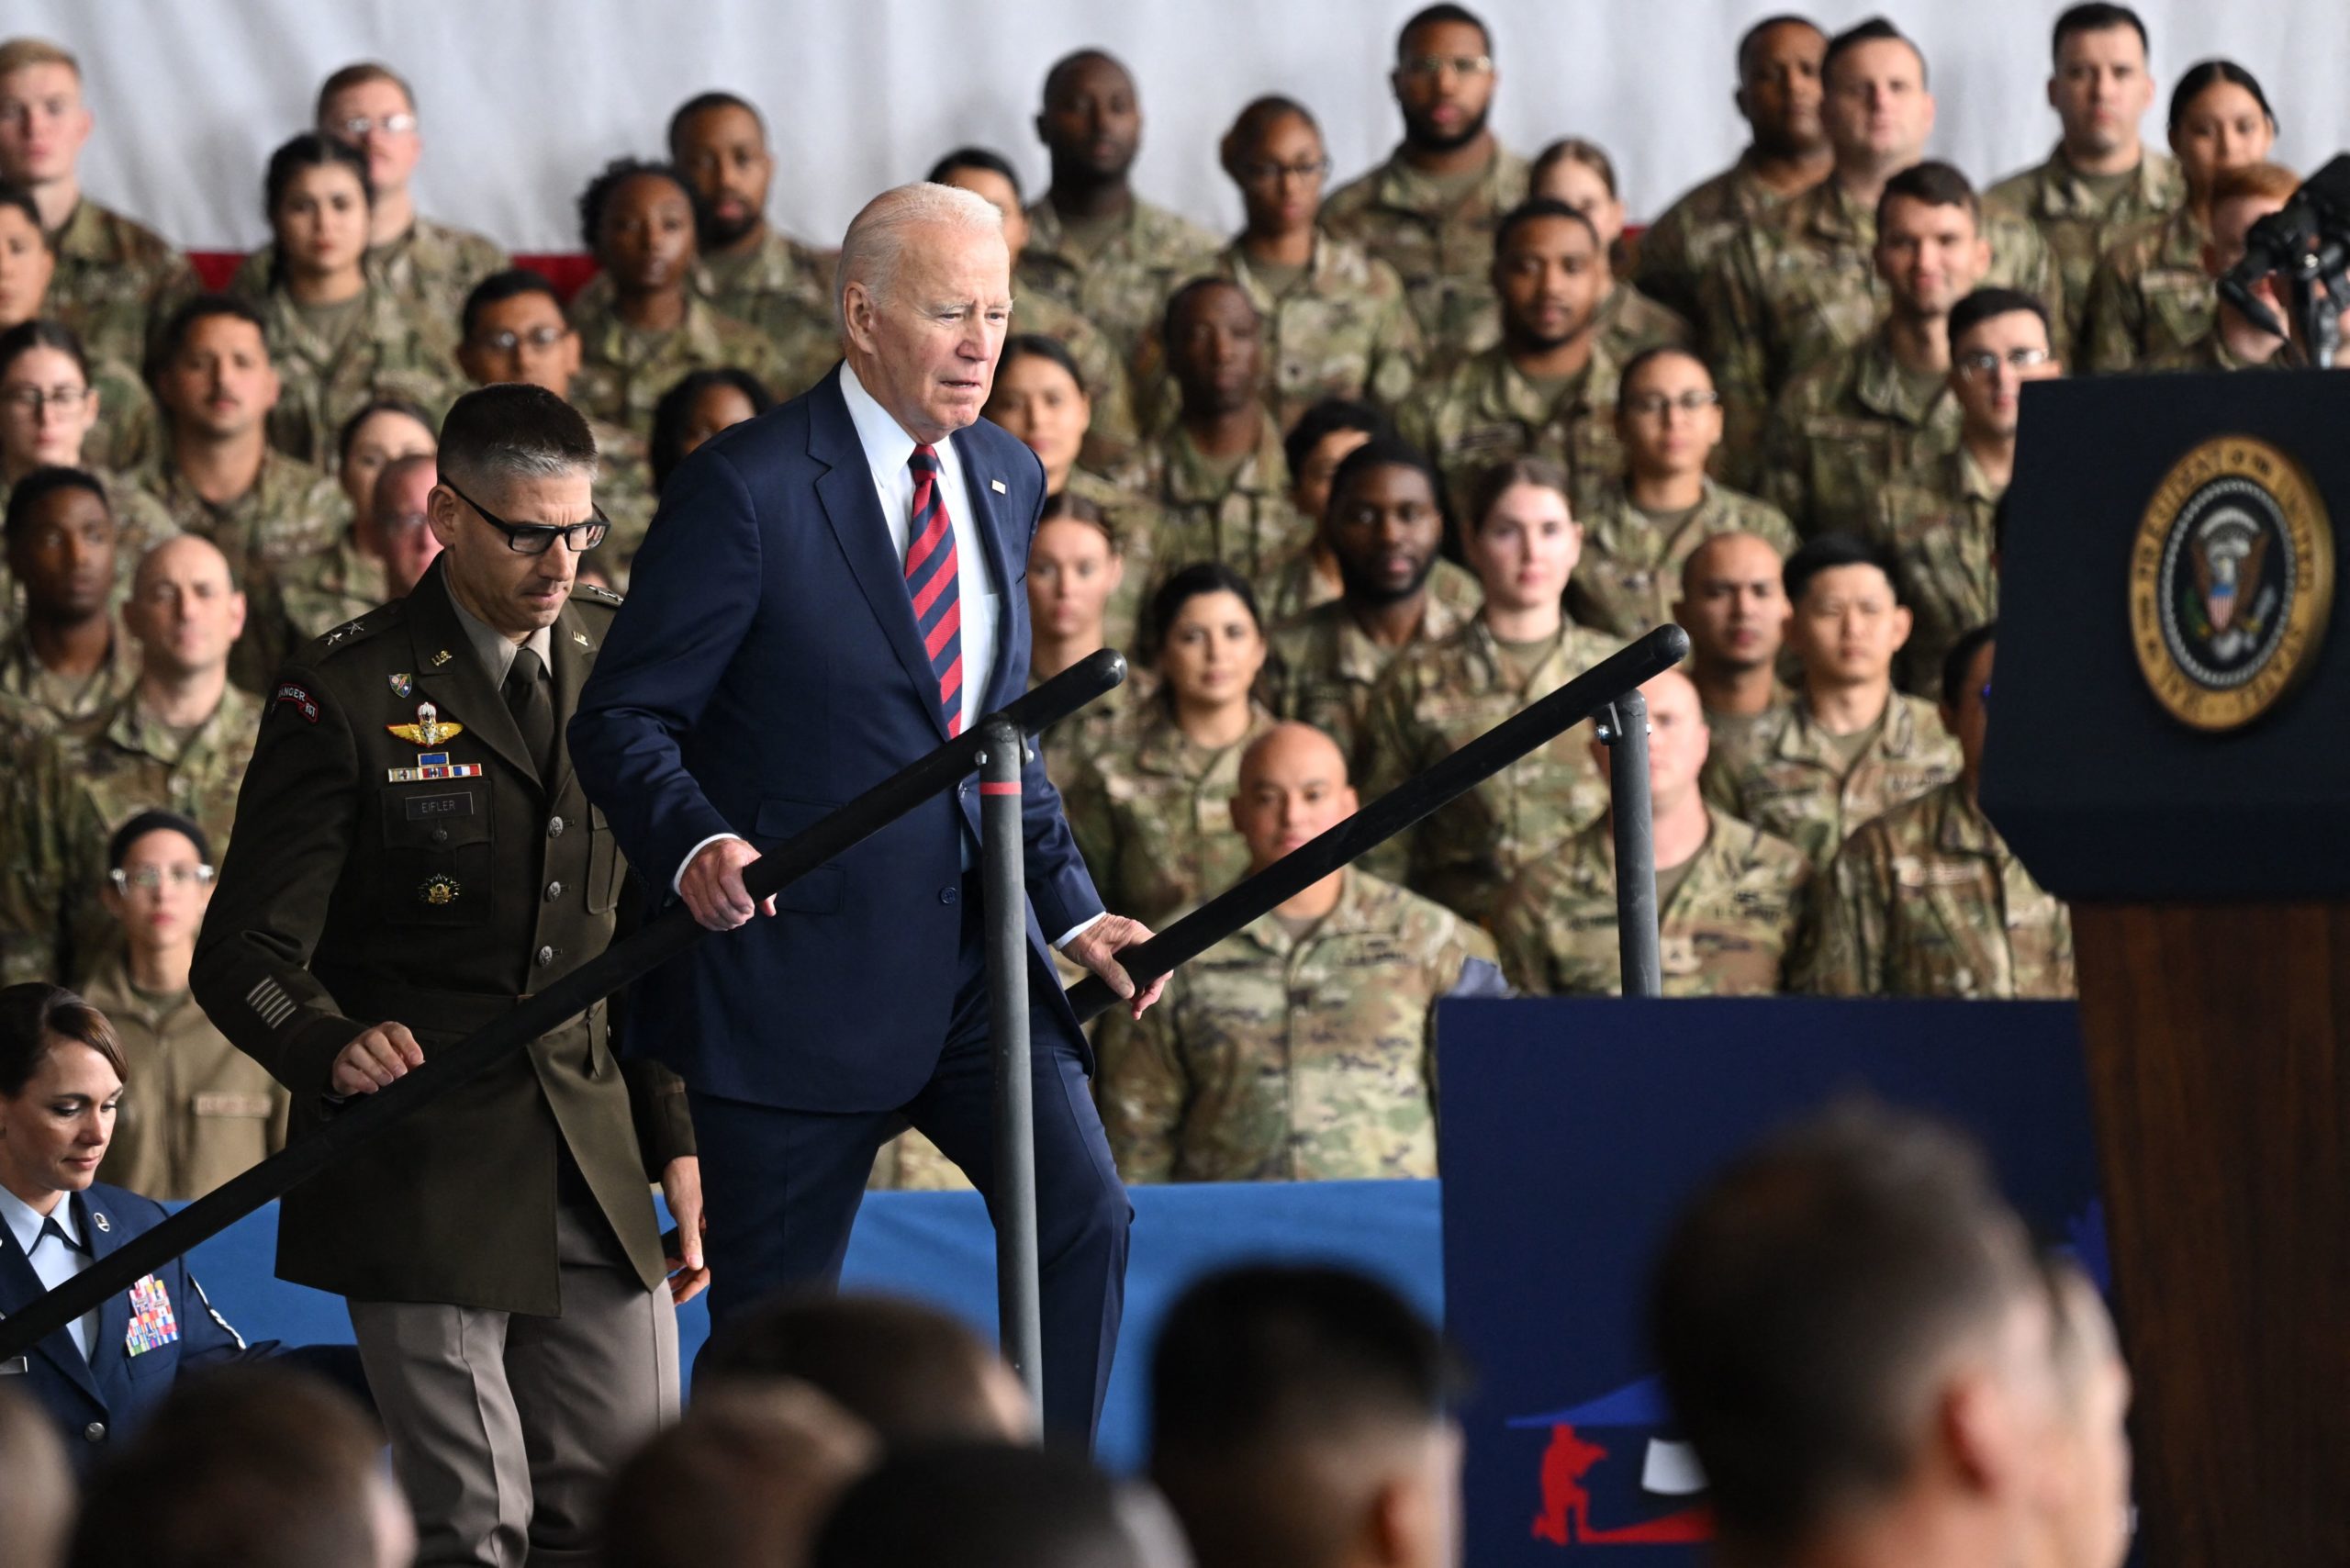 US President Joe Biden arrives to deliver remarks to service members, first responders, and their families on the 22nd anniversary of the September 11, 2001, terrorist attacks, at Joint Base Elmendorf-Richardson in Anchorage, Alaska, on September 11, 2023. (Photo by SAUL LOEB / AFP) (Photo by SAUL LOEB/AFP via Getty Images)